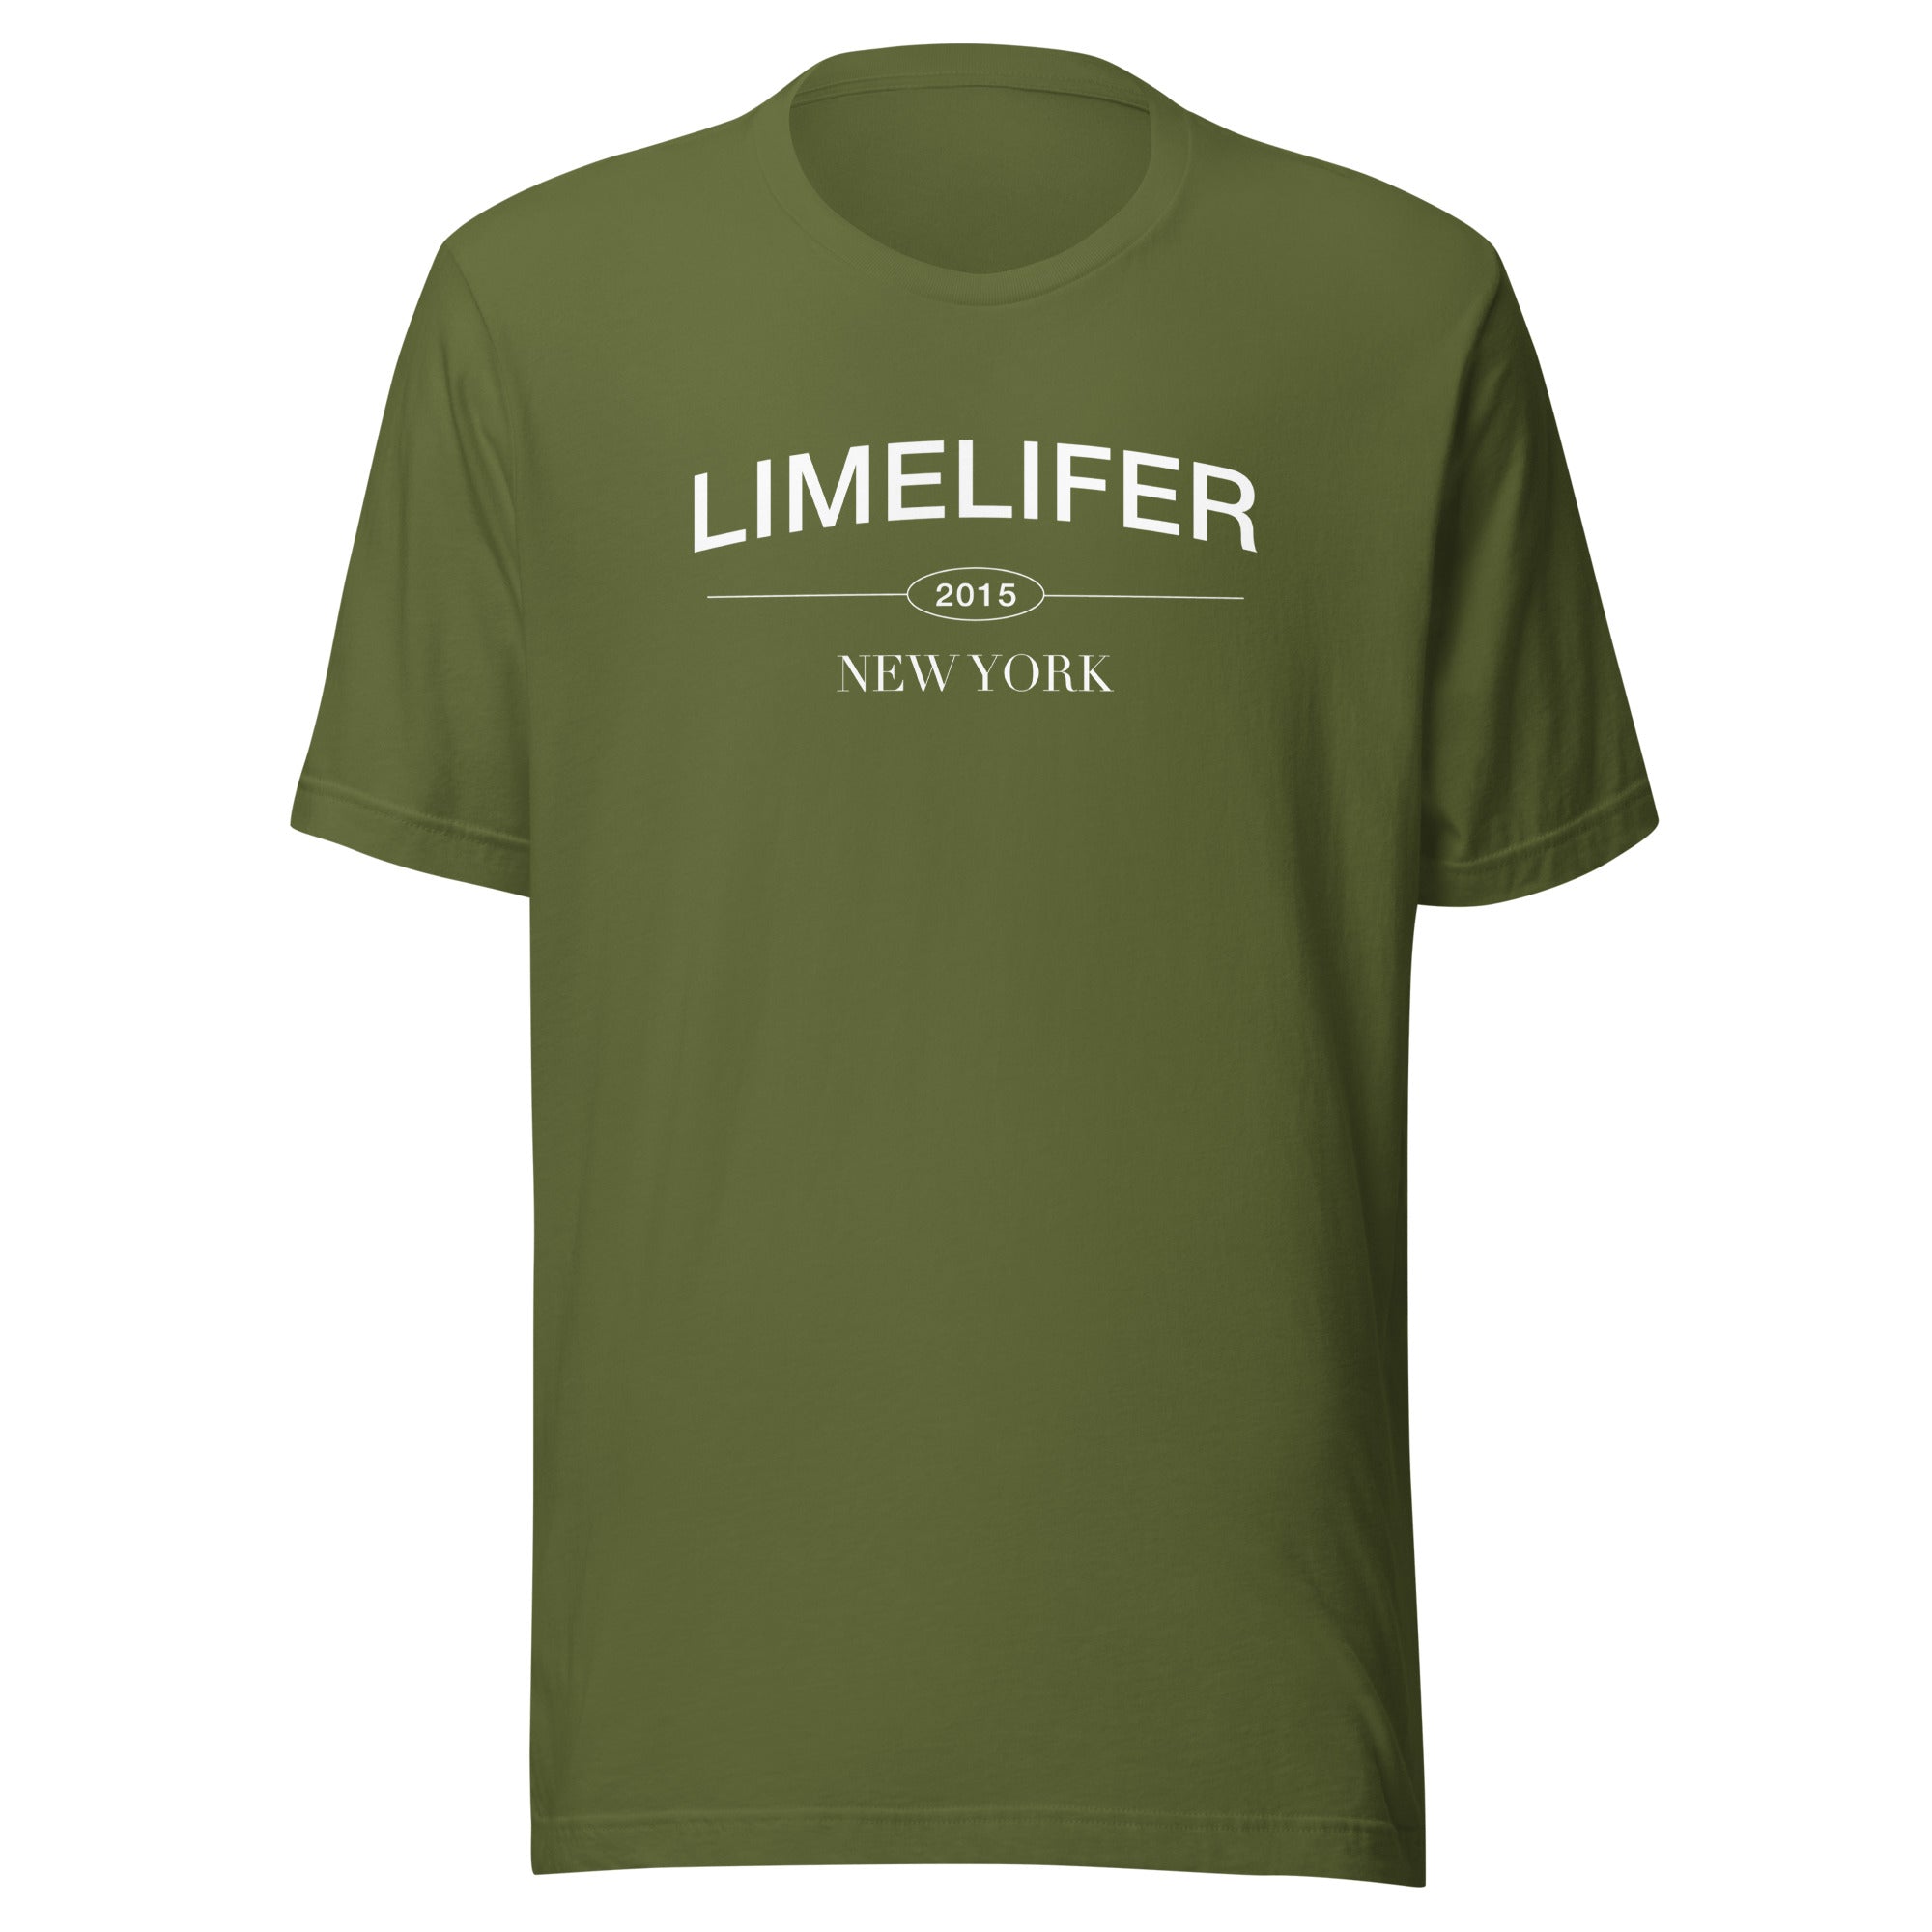 LIMELIFER NY - Unisex t-shirt in Heather Orchid, Black, DarkGrey Heather and Olive